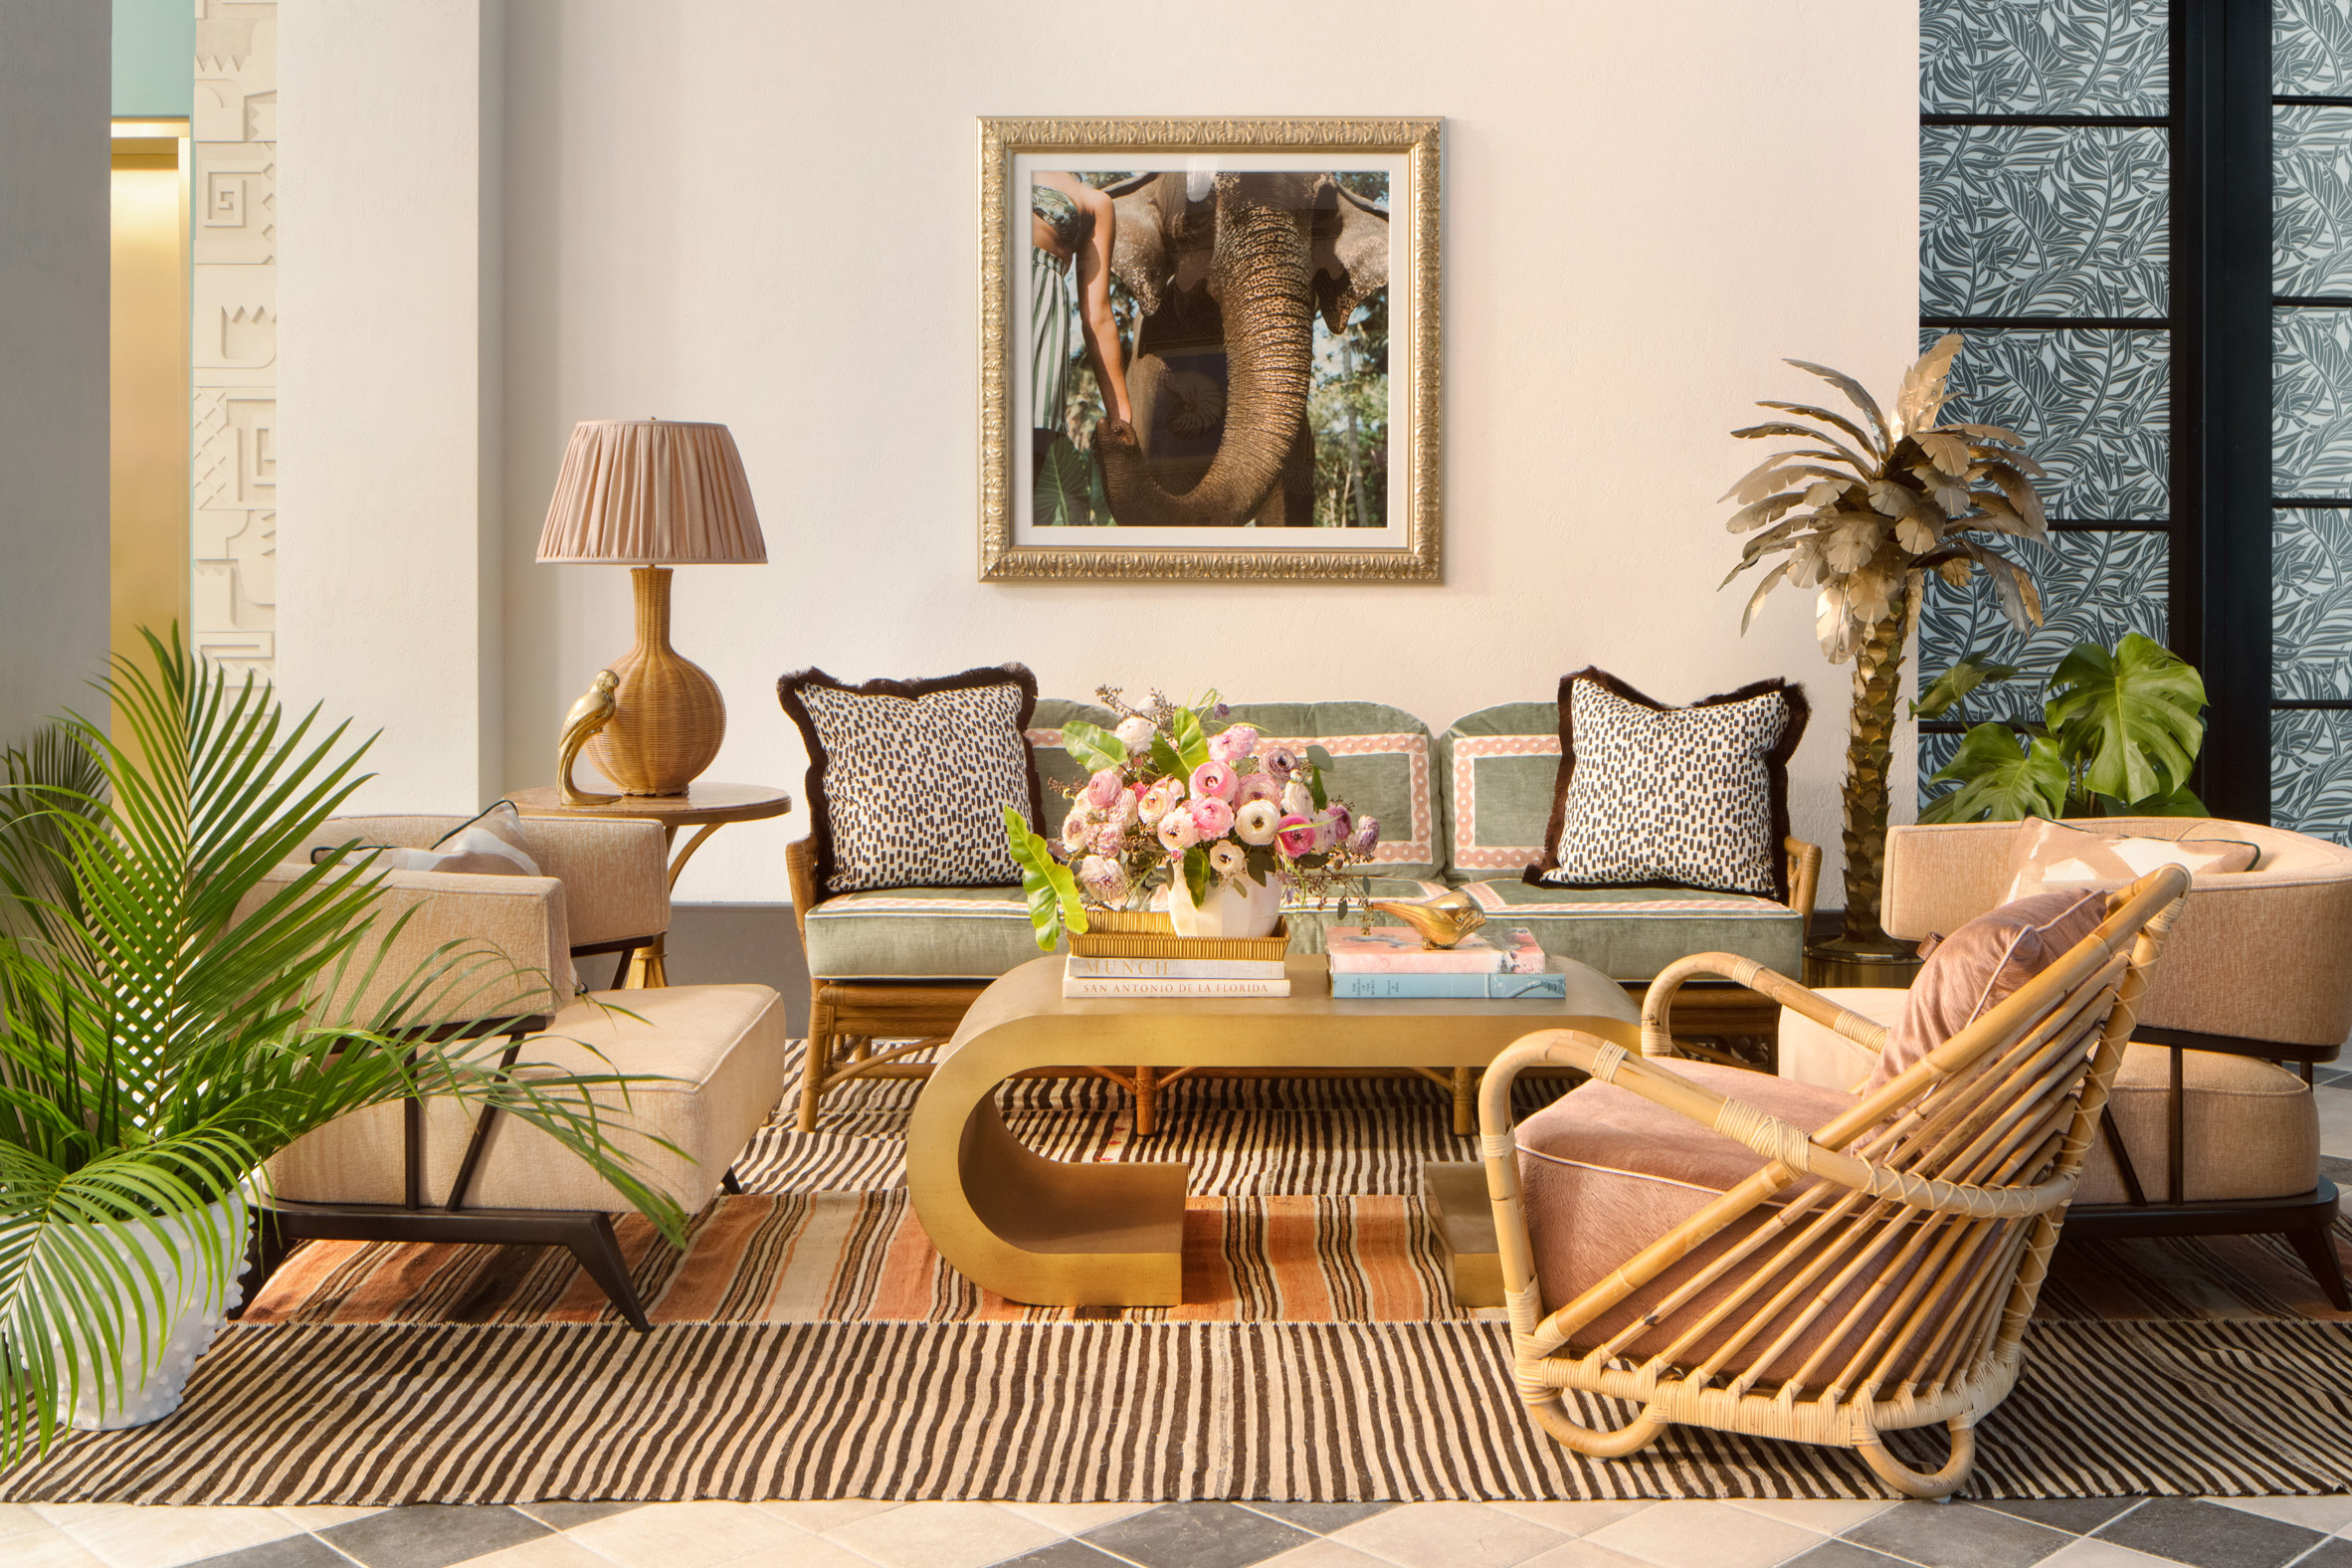 Lounge of Miami hotel with rattan furniture and leopard print pillows designed by Ken Fulk for Pharrell Williams and David Grutman